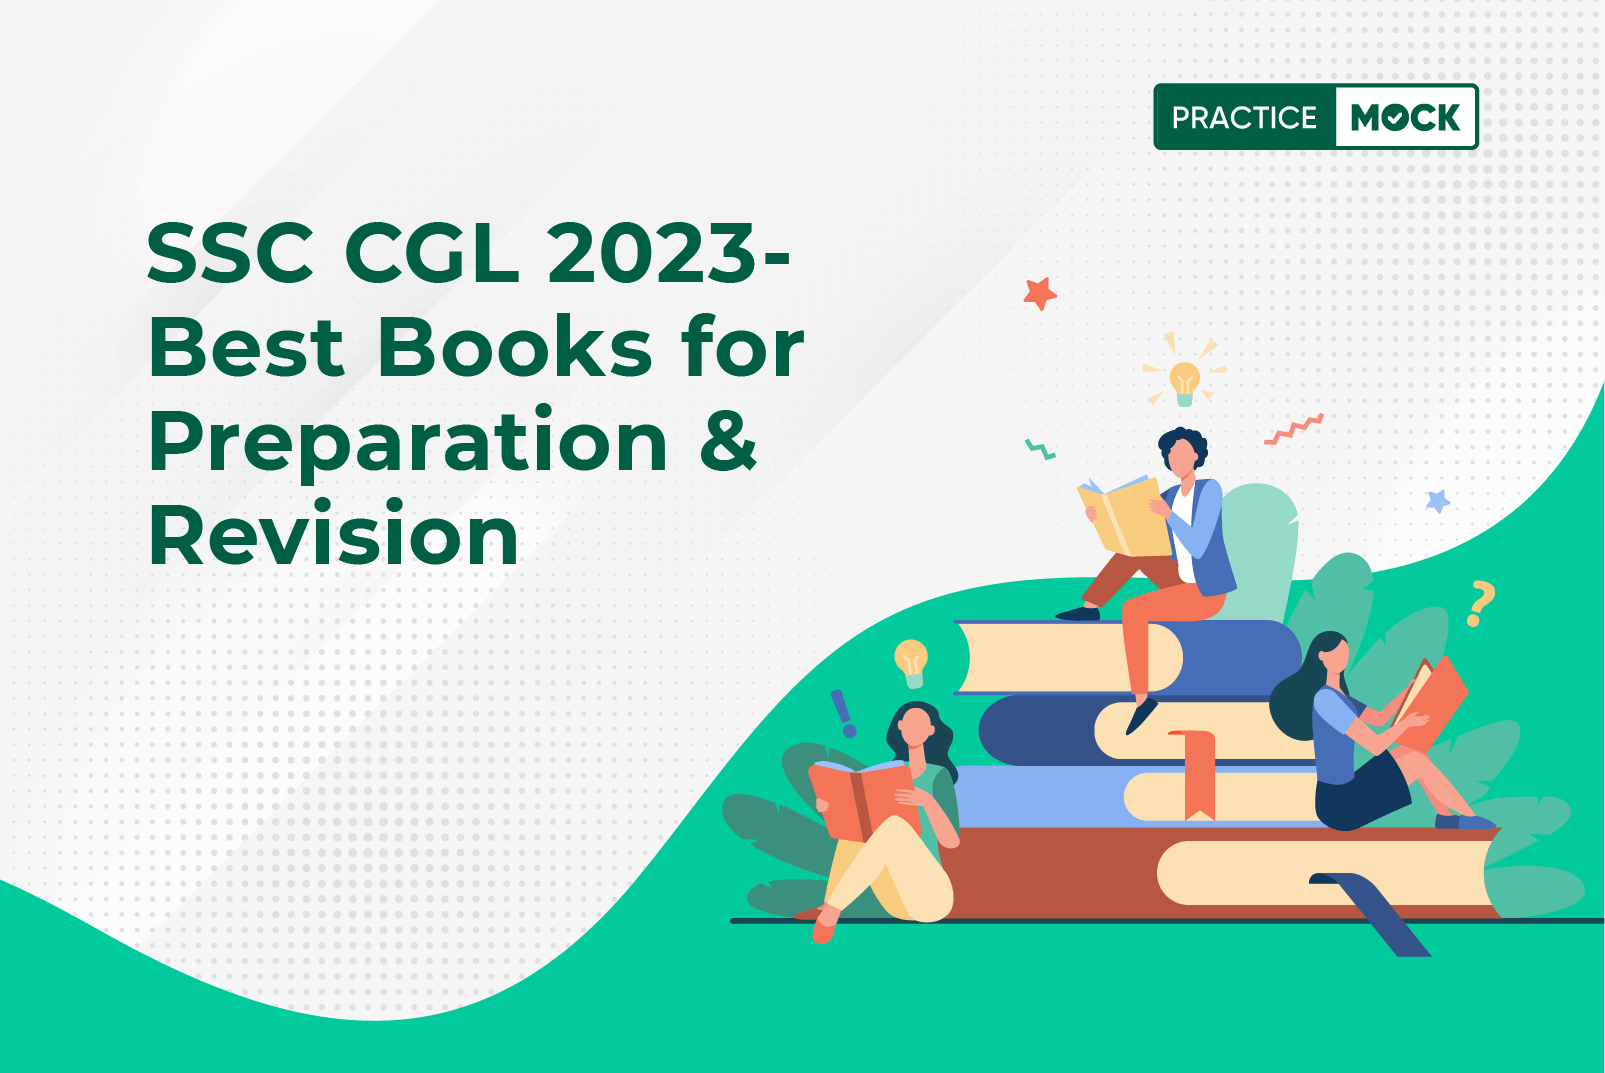 SSC CGL - Best Books for Preparation & Revision